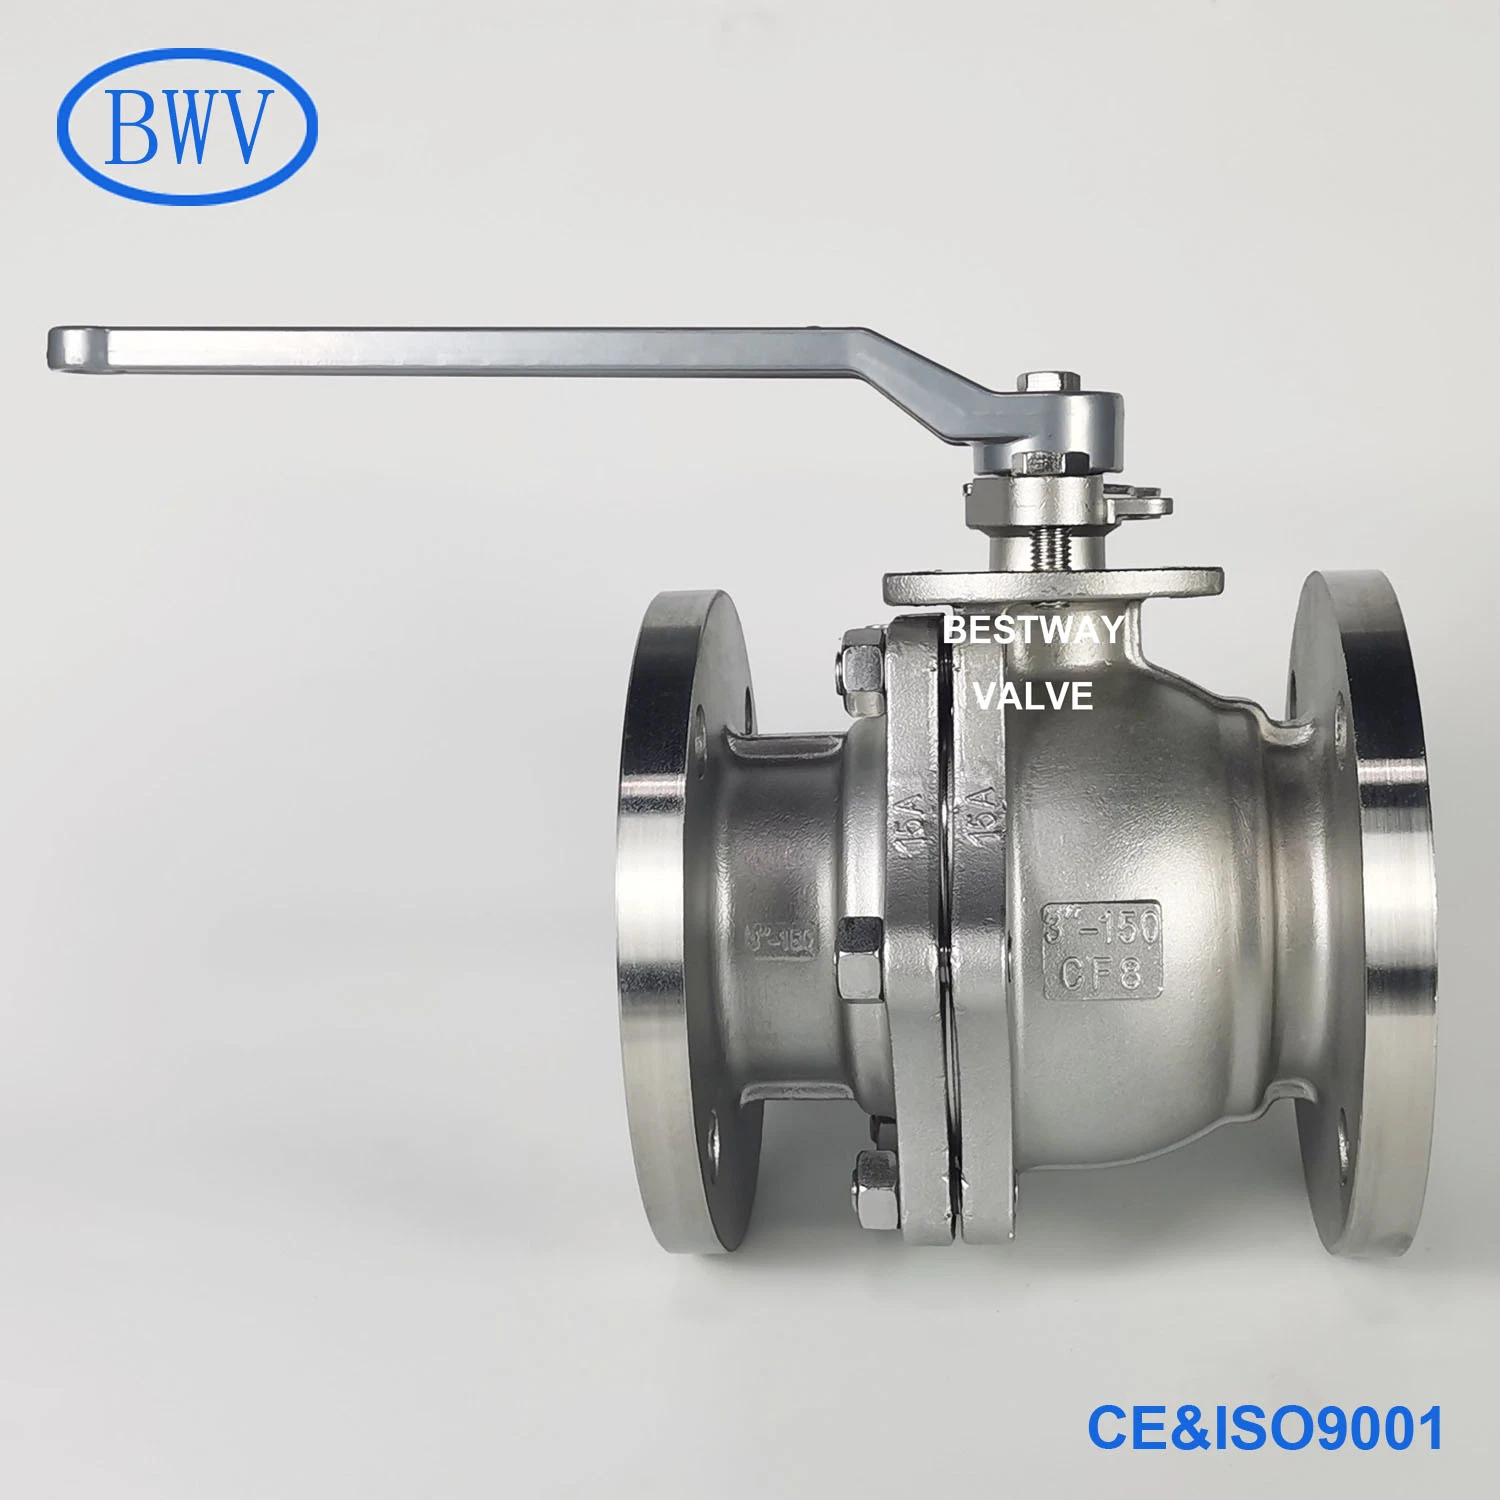 China Industrial Valve ANSI 150lb CF8 CF8m 304 316 Wcb Full Port Manual Flanged/Flange End Stainless Steel Floating Ball Valves